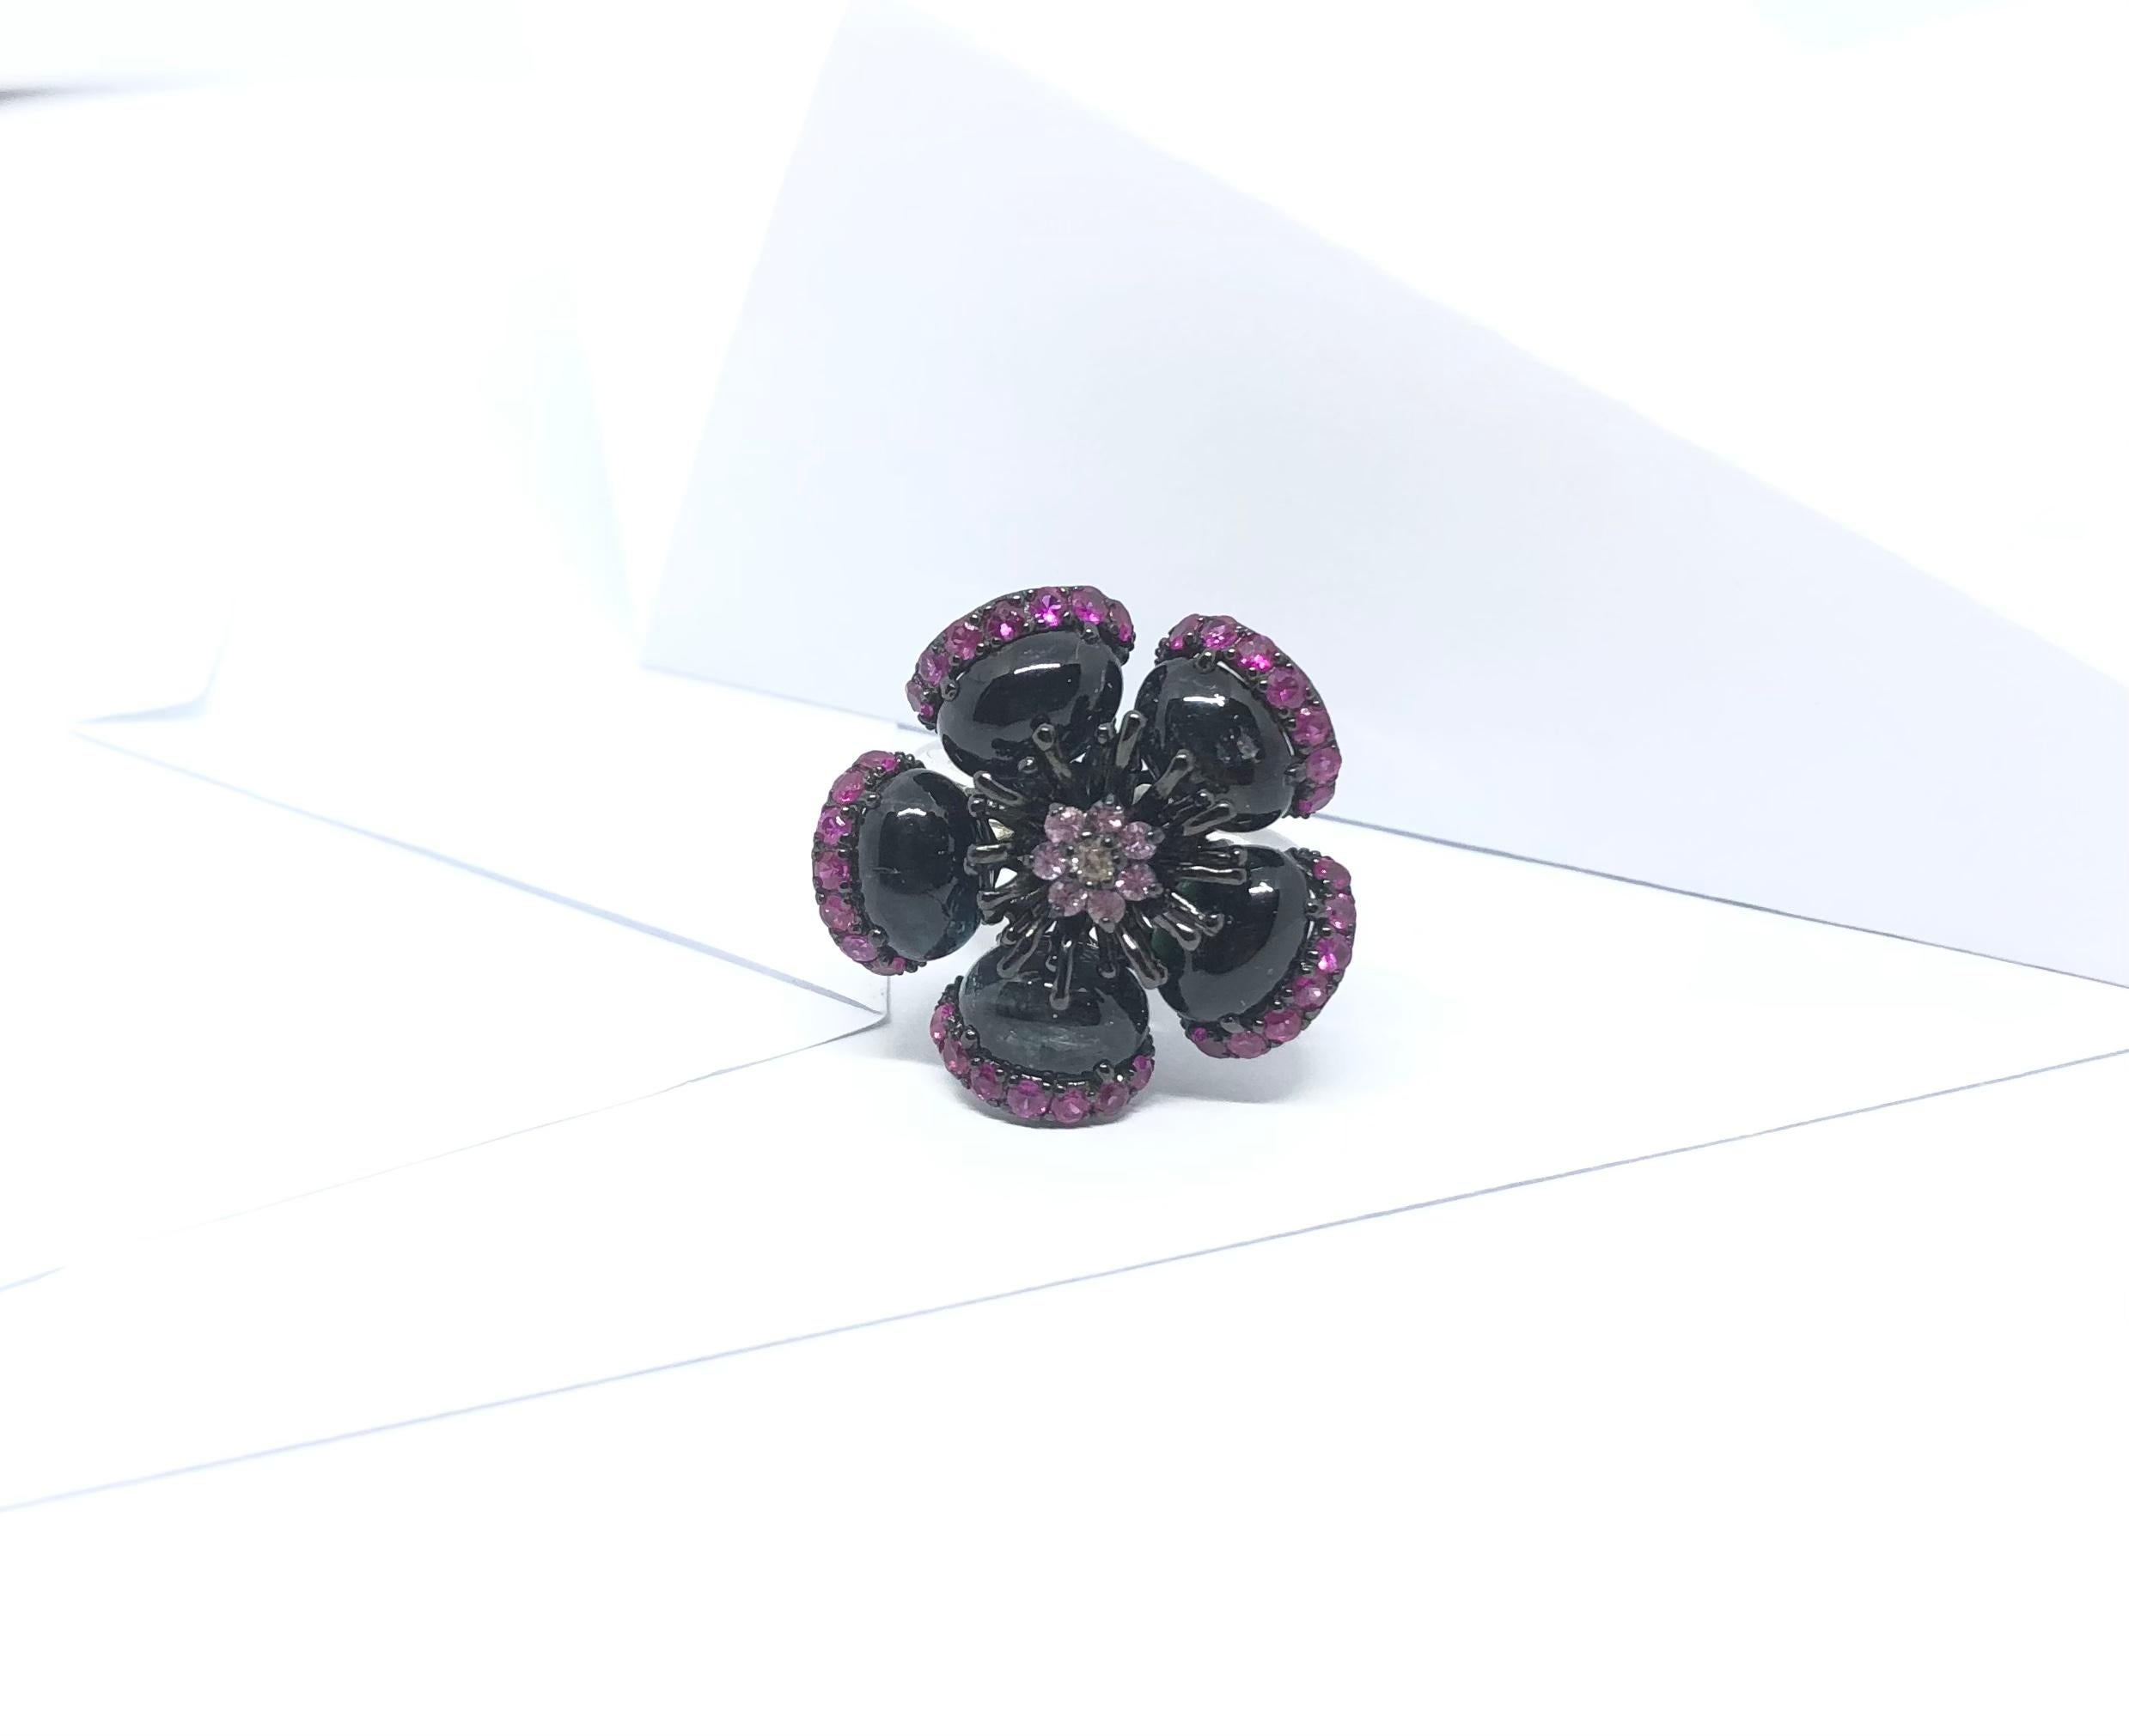 Tourmaline, Ruby and Pink Sapphire Ring set in Silver Settings

Width:  2.6 cm 
Length: 2.6 cm
Ring Size: 55
Total Weight: 11.06 grams

*Please note that the silver setting is plated with rhodium to promote shine and help prevent oxidation. 